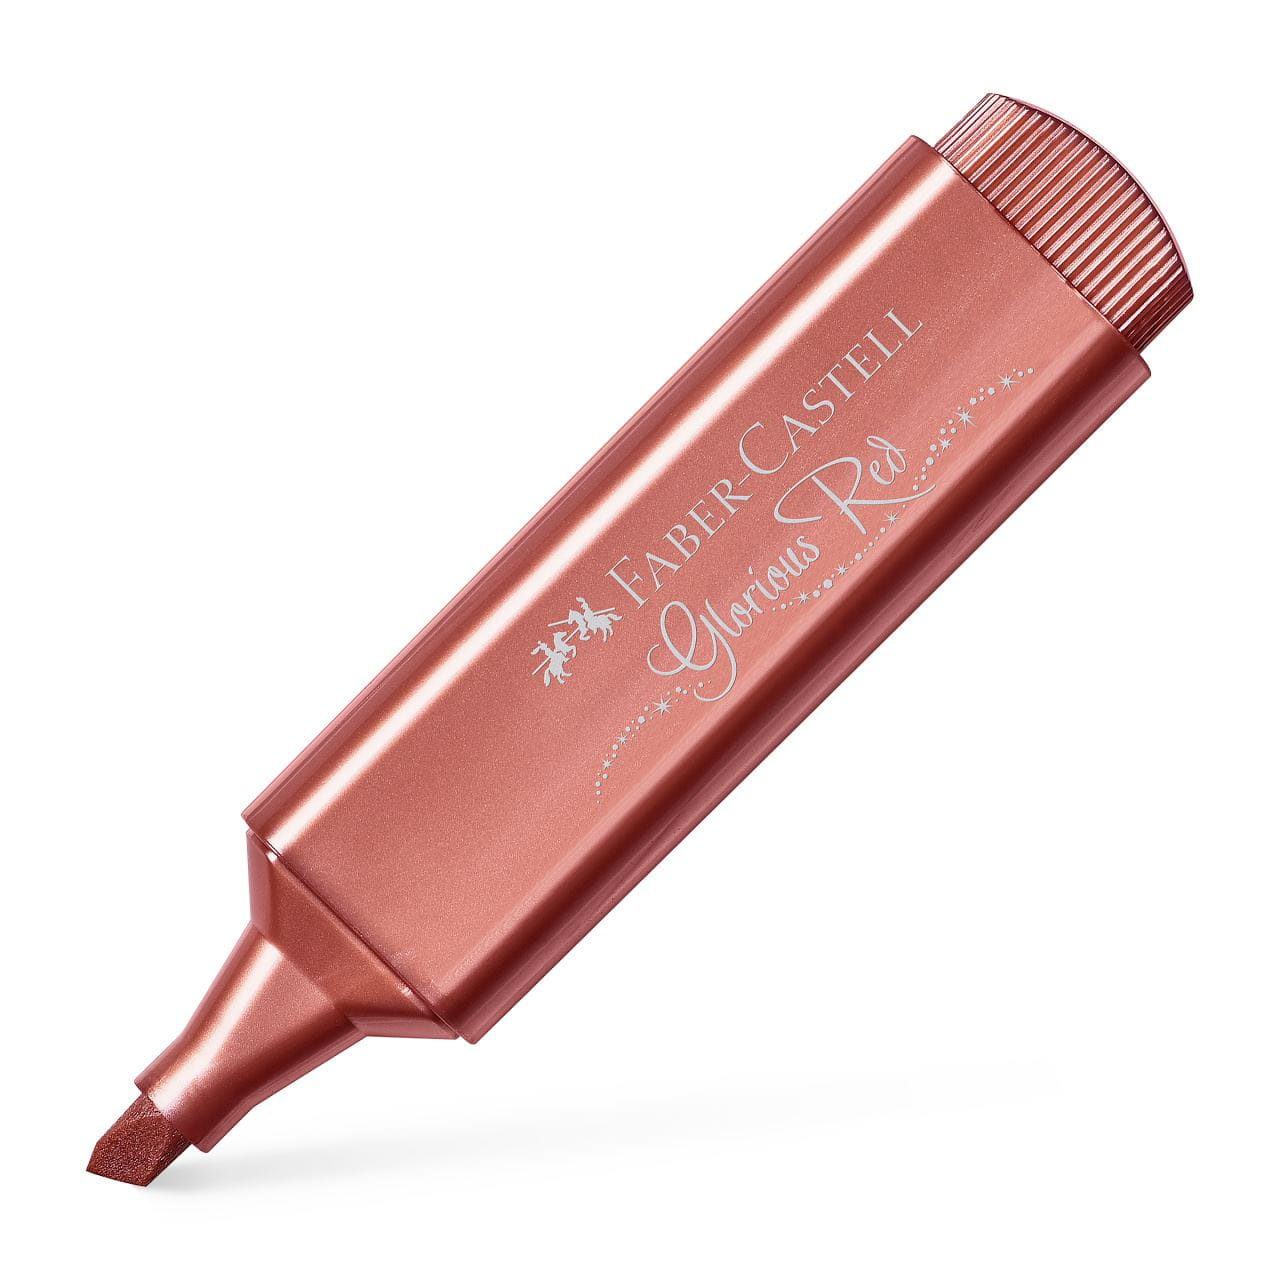 Faber-Castell - Surligneur TL 46 Metallic glorious red